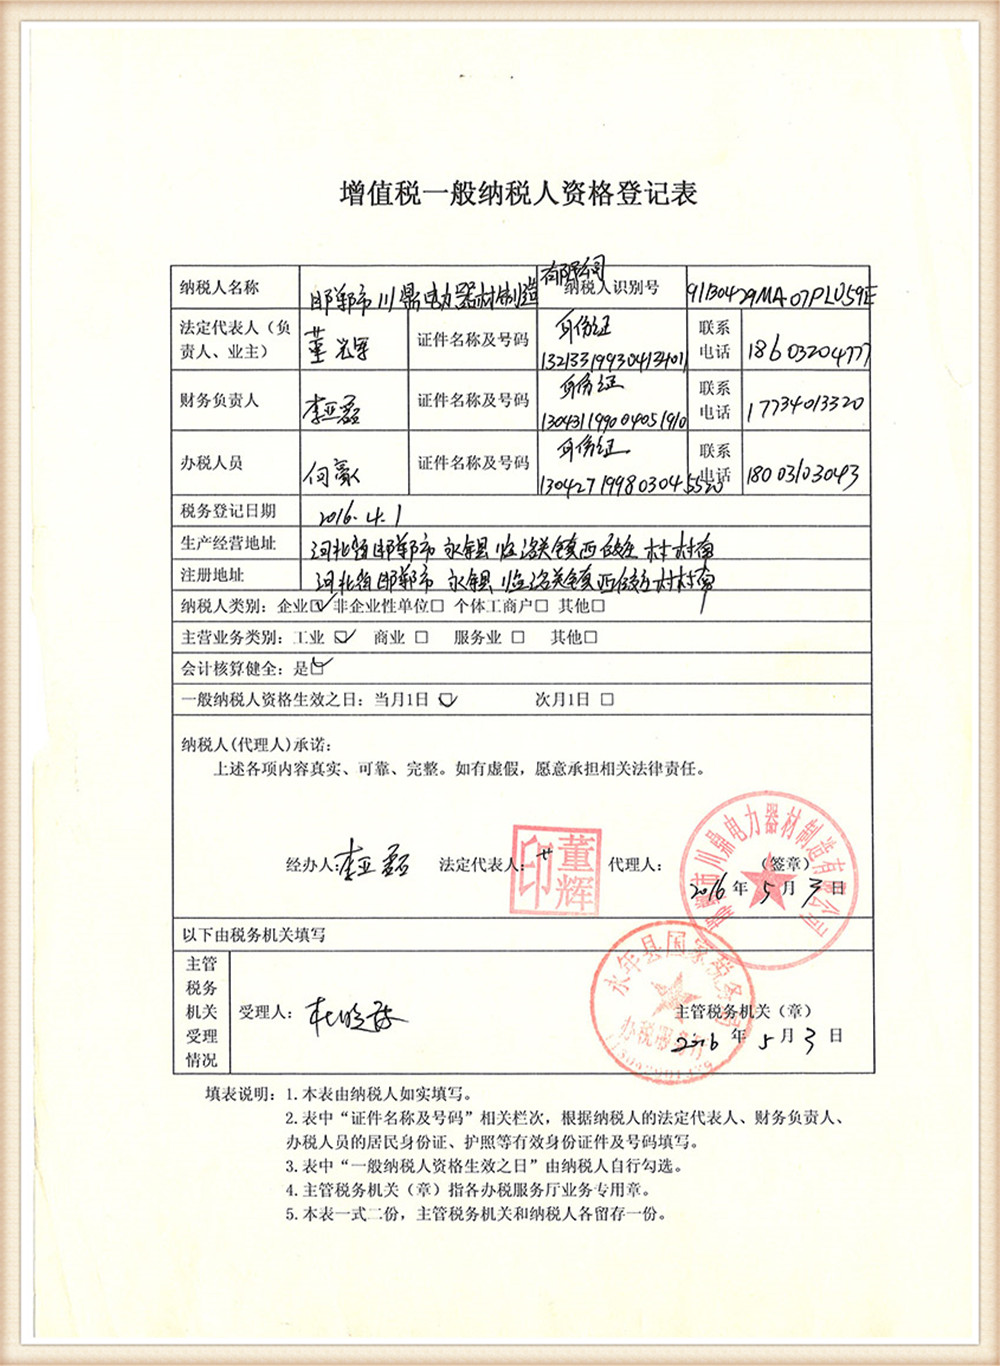 General taxpayer certificate